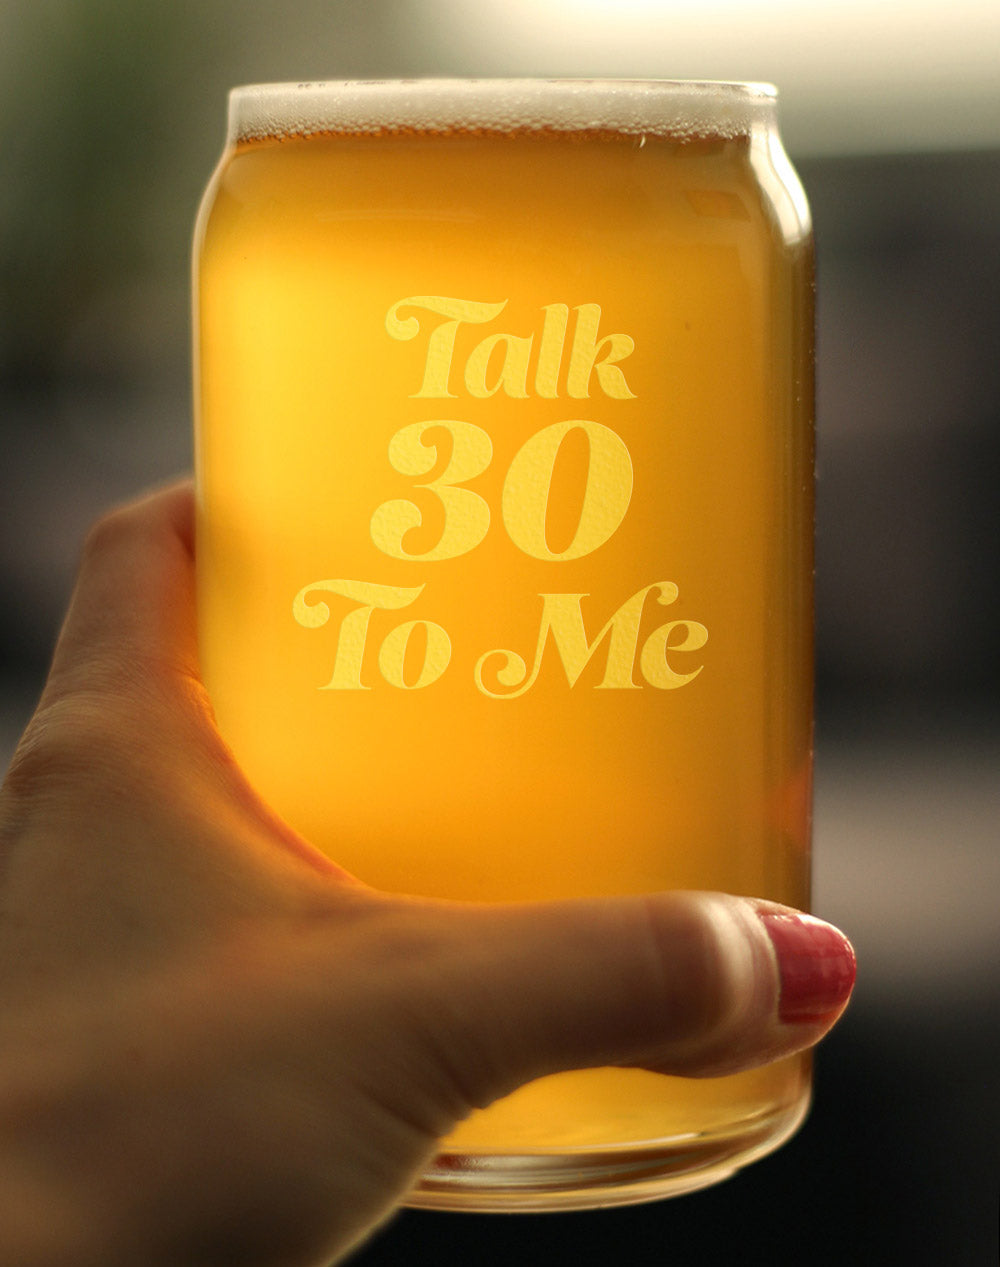 Talk 30 To Me - Funny 16 oz Beer Can Pint Glass - 30th Birthday Gifts for Men or Women Turning 30 - Bday Party Decor